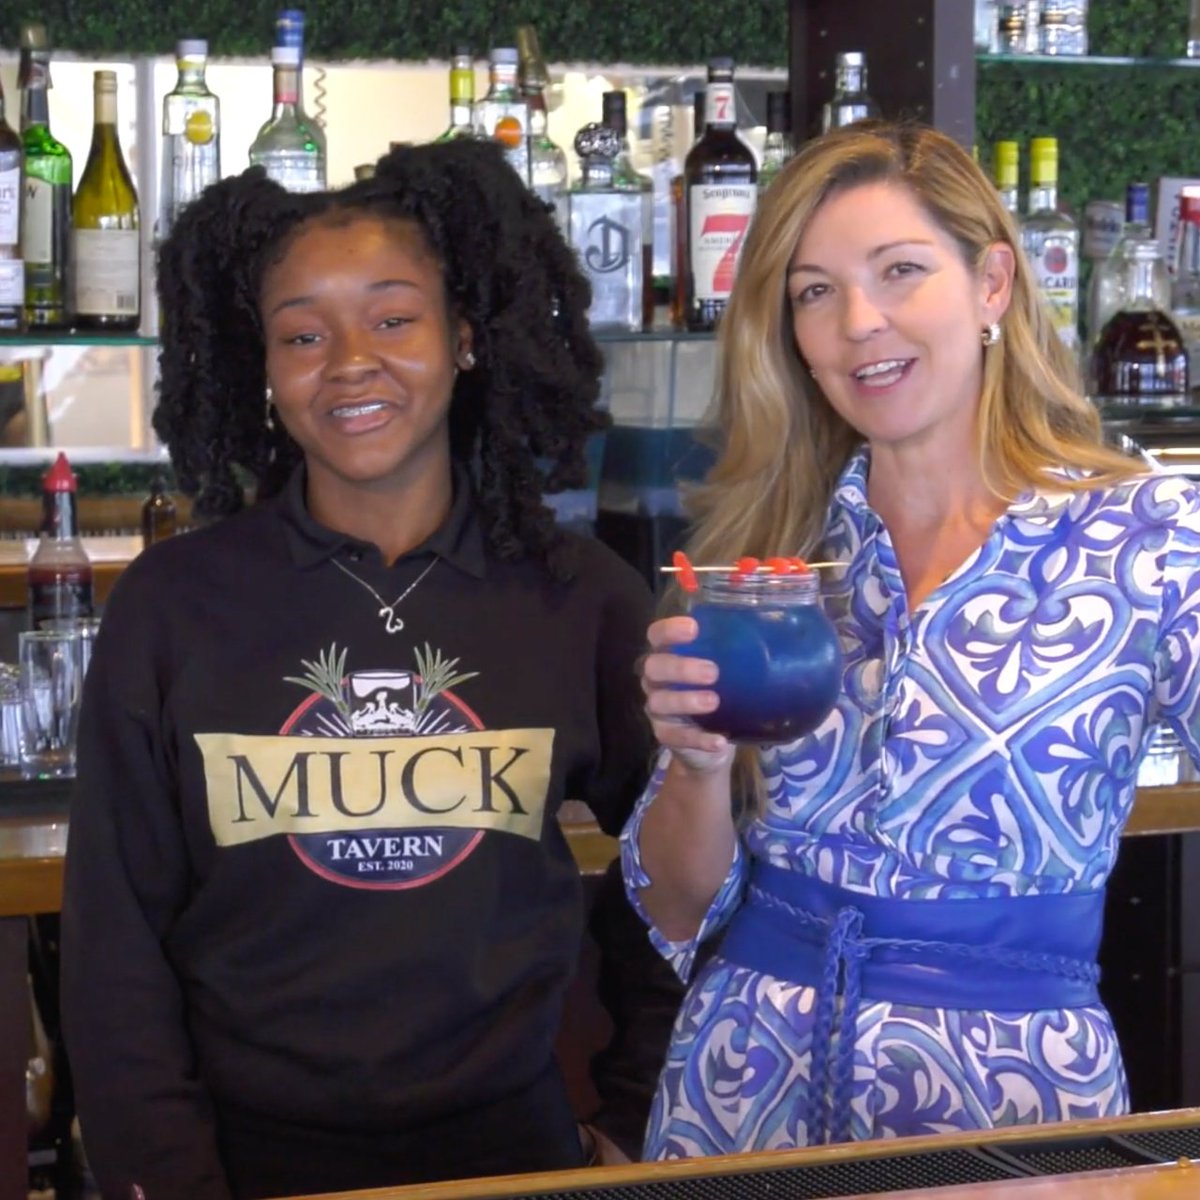 It's always Happy Hour at The Muck Tavern!
Check out Passport to the Palm Beaches episodes on demand ThePalmBeaches.tv !
#passporttothepalmbeaches #palmbeaches #palmbeachcounty #jaqjourney
#jacquelinejourney #palmbeachchic #discoverthepalmbeaches
@pbcgov @jaqjourney